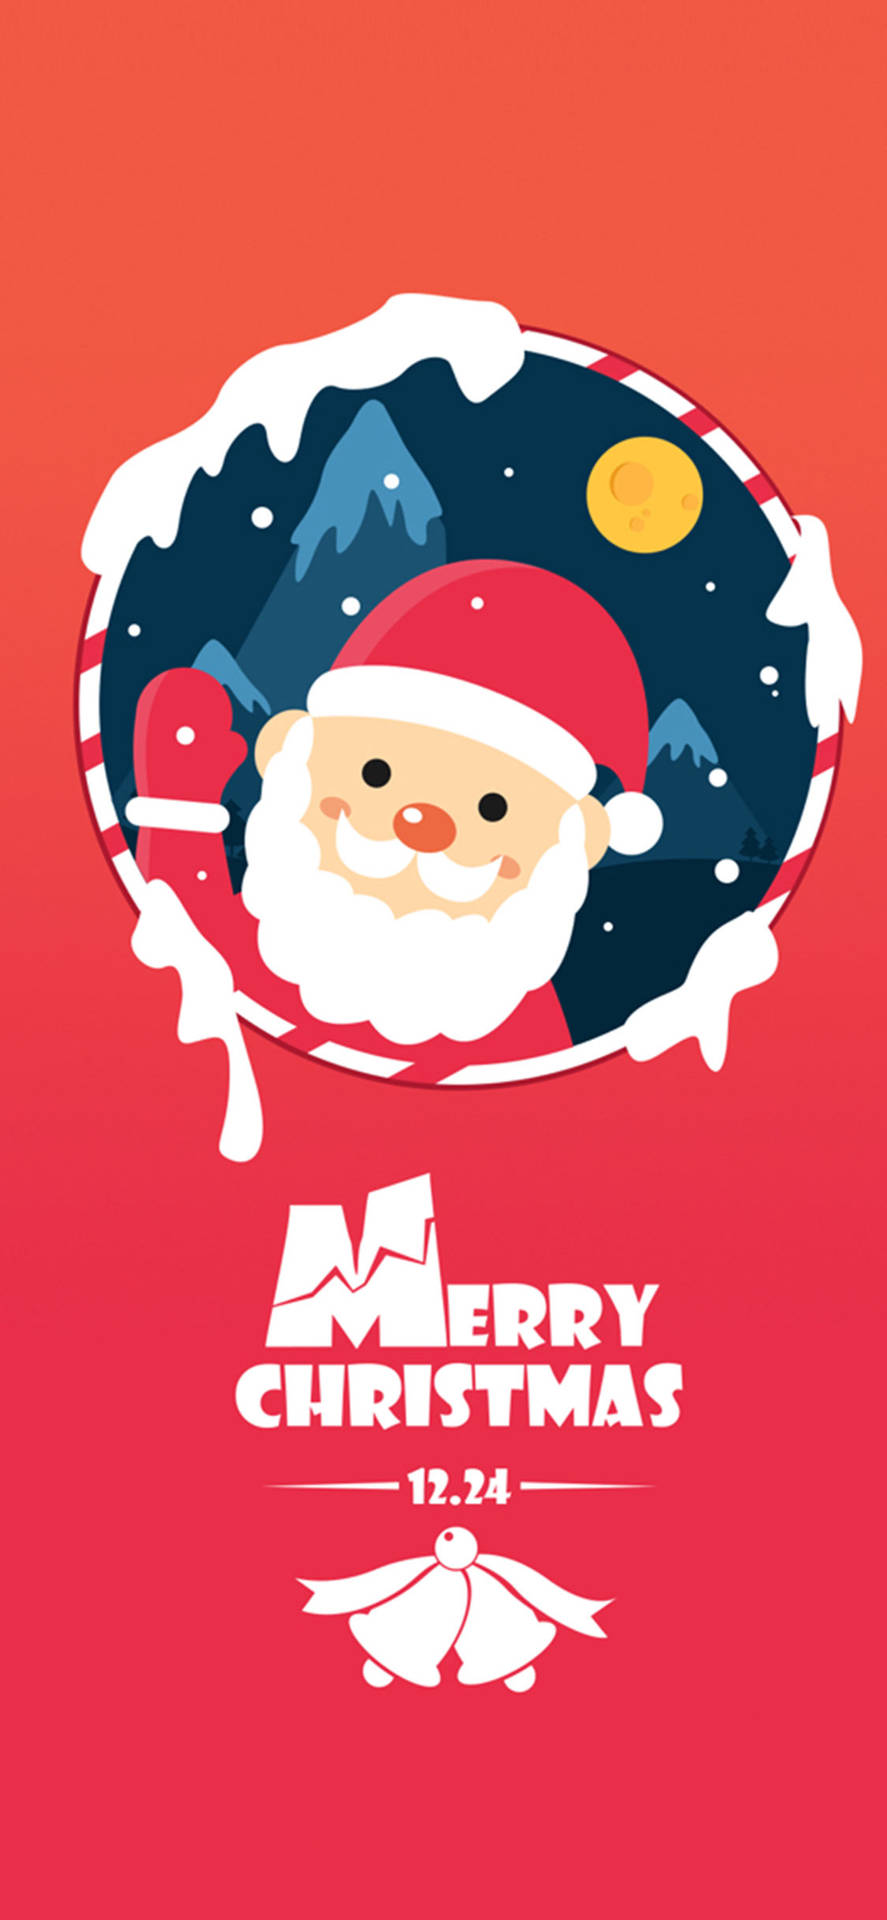 Merry Christmas Greeting Iphone Background